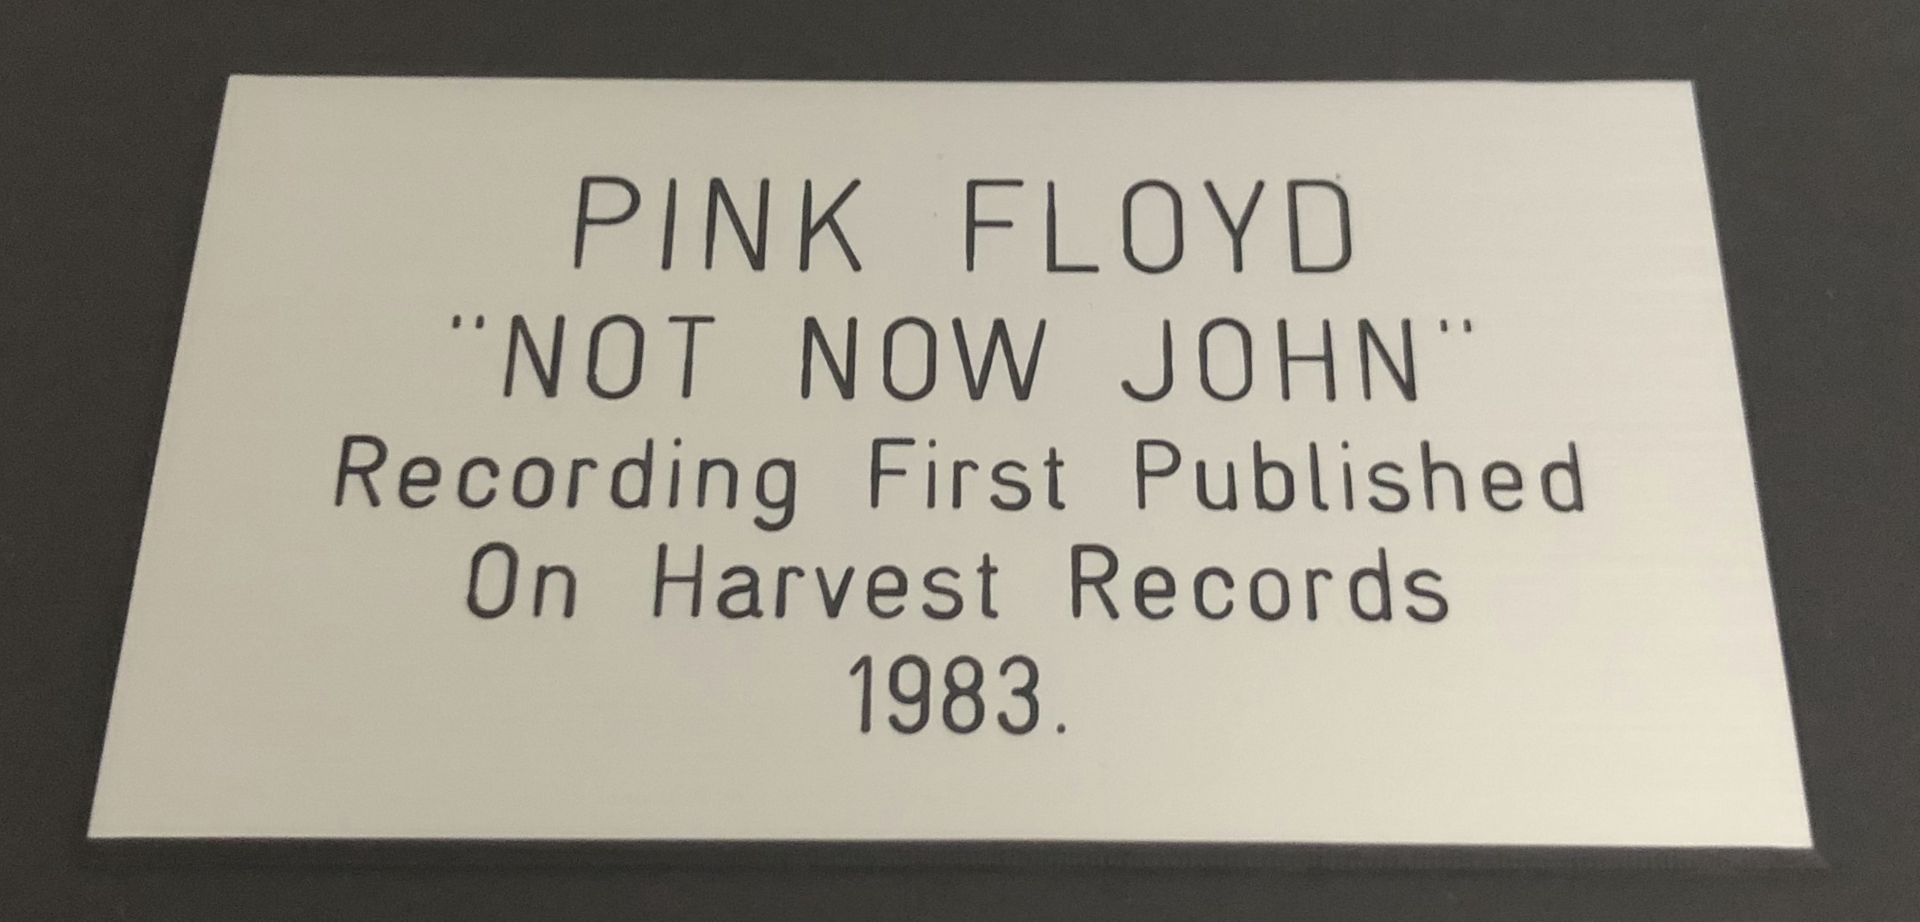 1 x Pink Floyd 'Not Now John' Silver 7 Inch Vinyl - Mounted and Presented in Black Frame - Ref: - Image 3 of 3